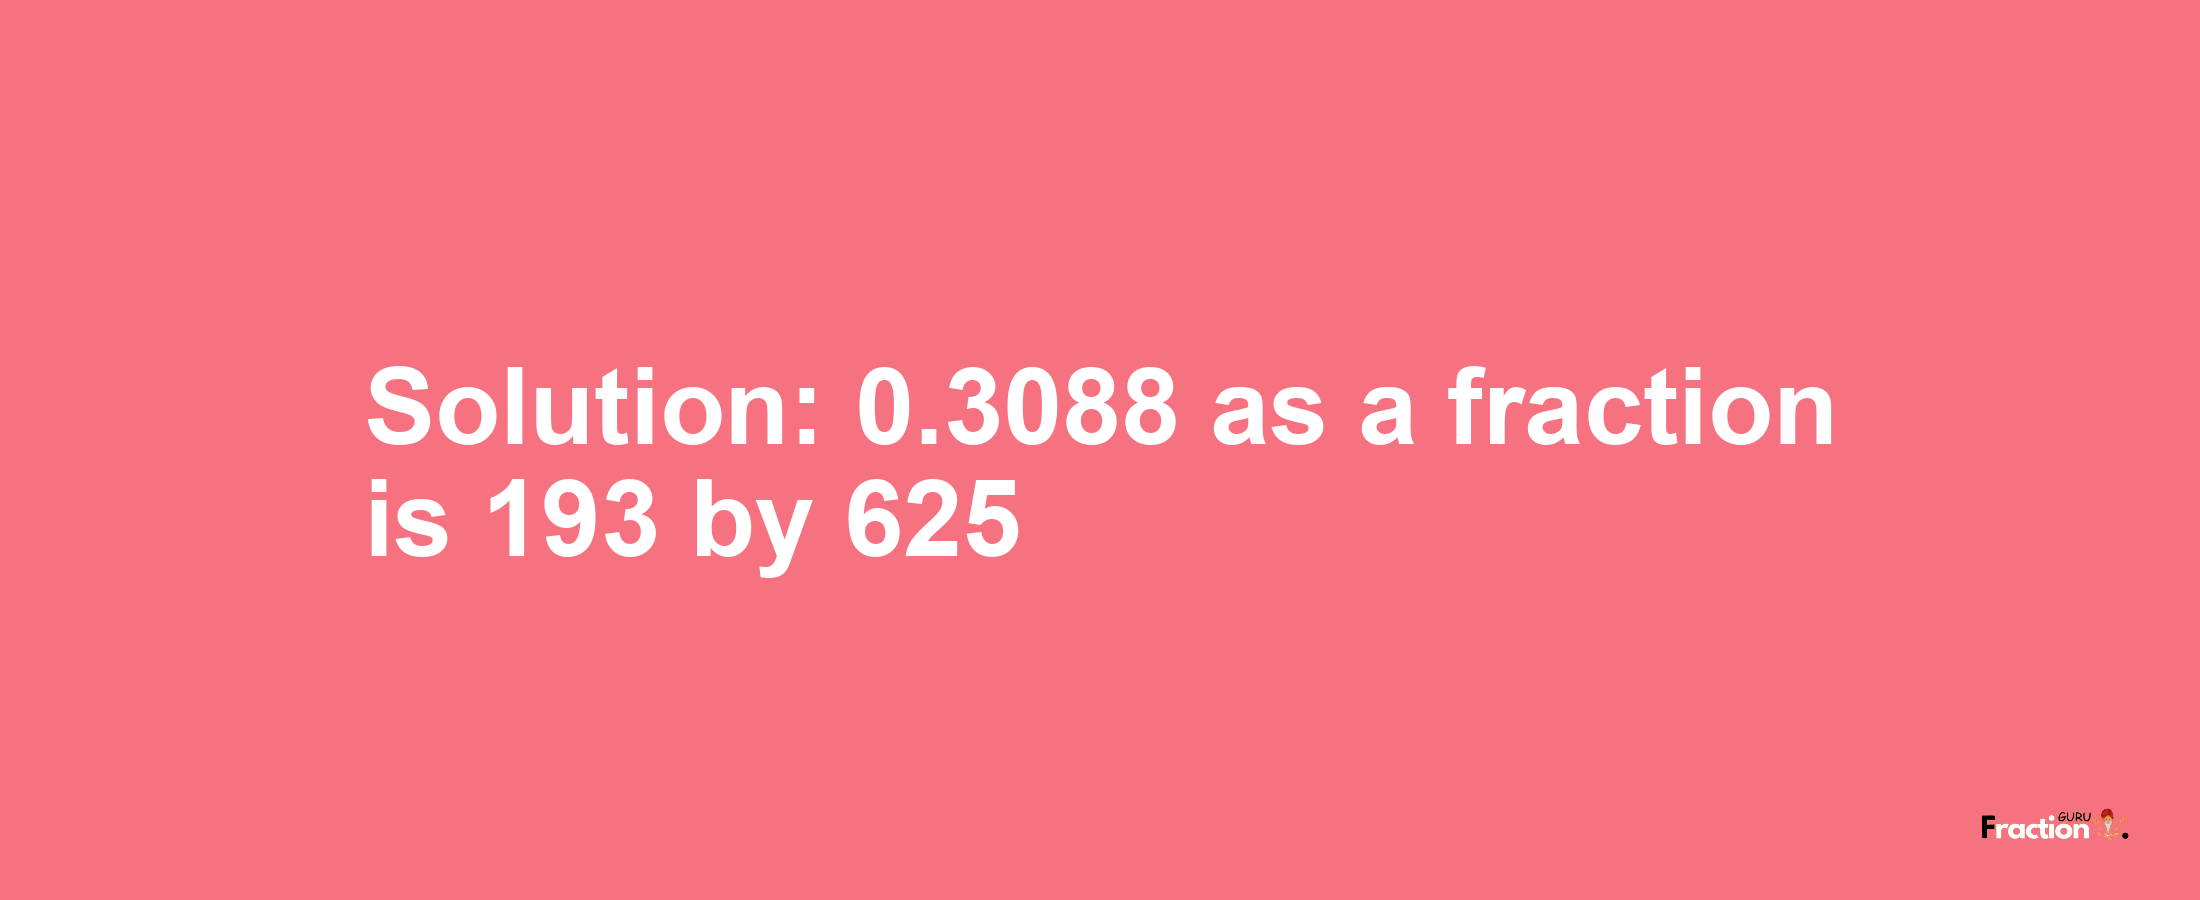 Solution:0.3088 as a fraction is 193/625